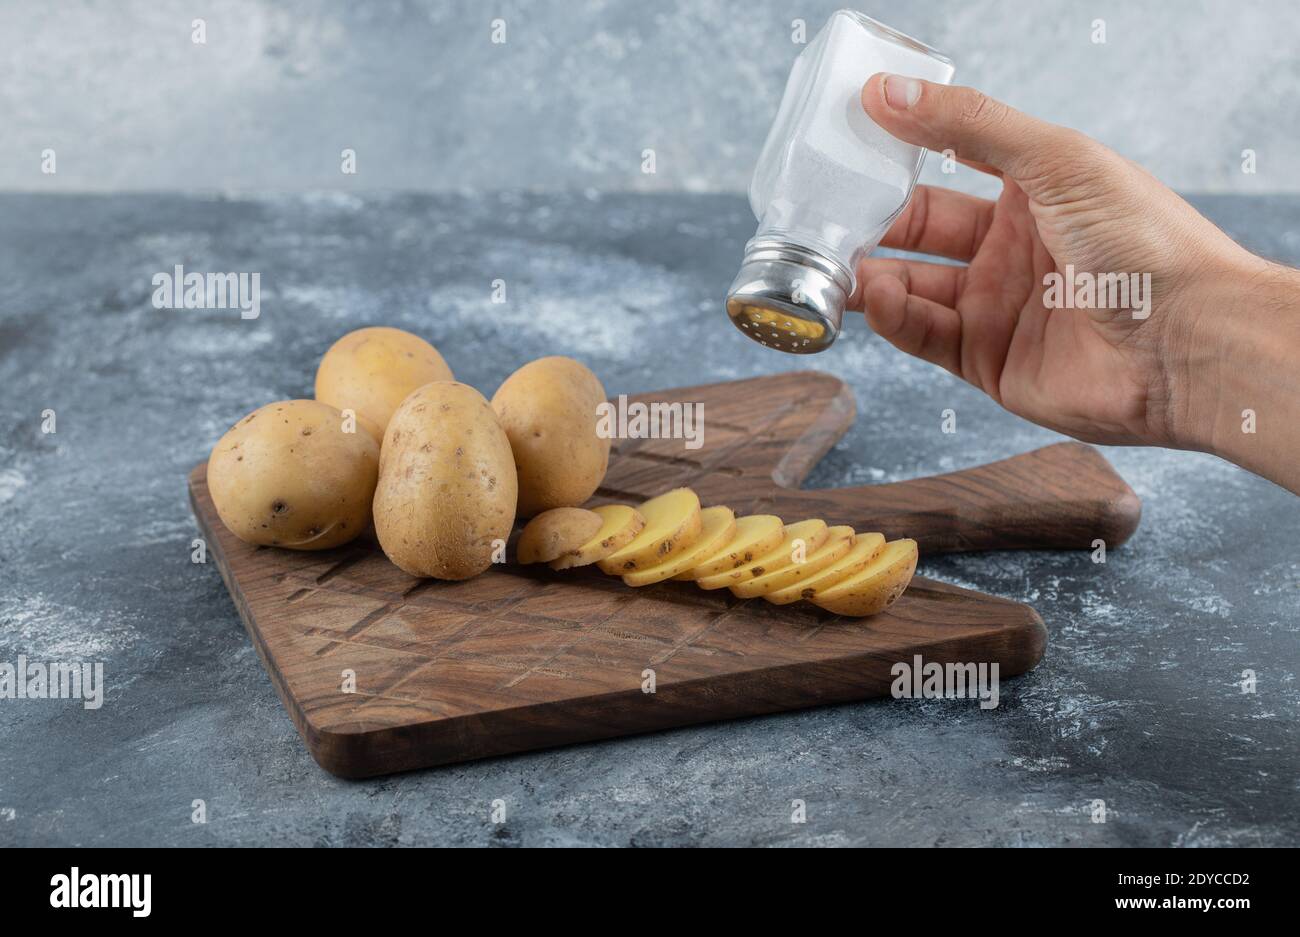 Man pouring salt over the sliced potatoes Stock Photo